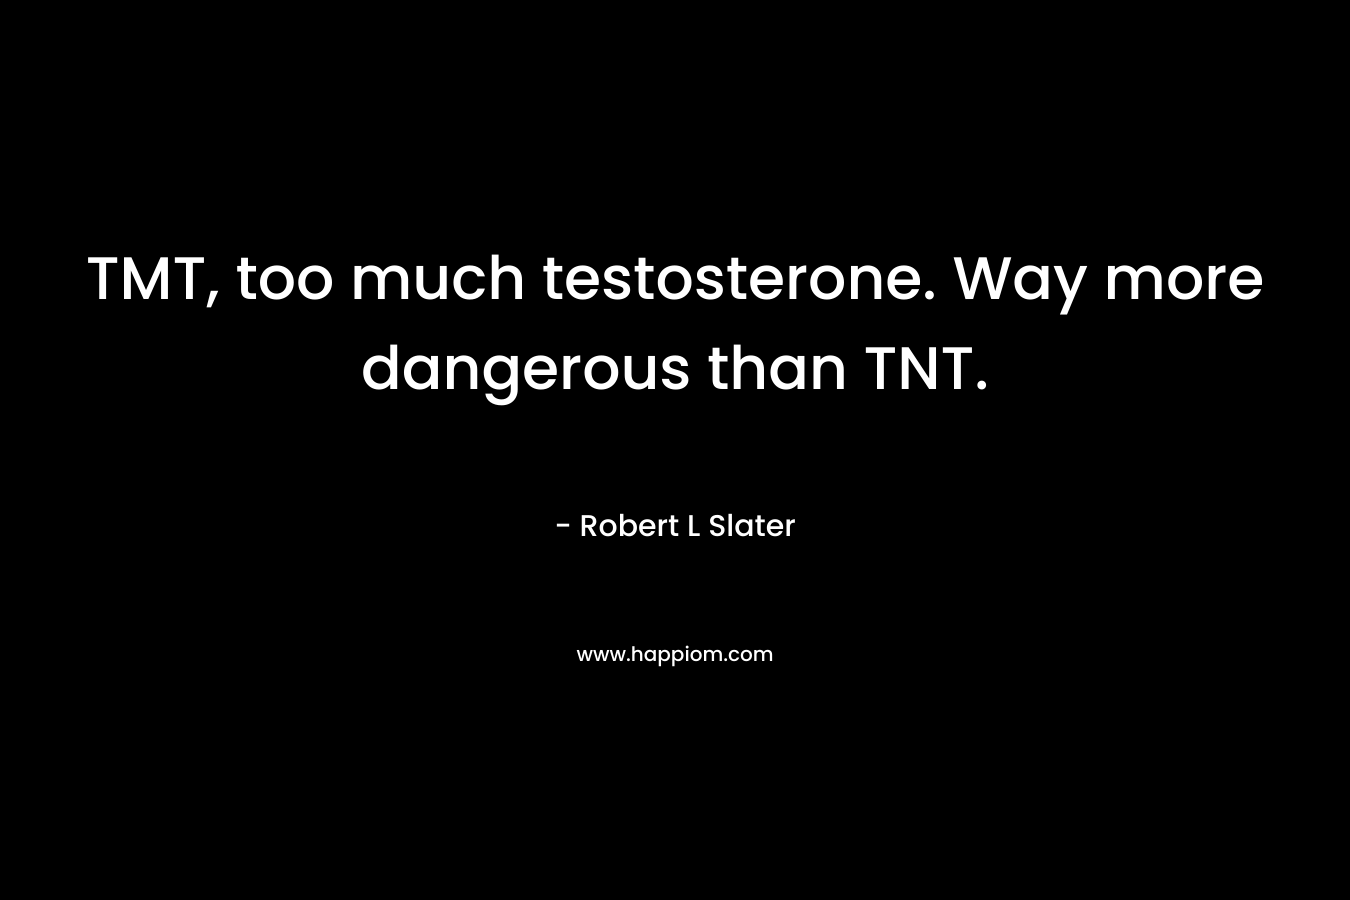 TMT, too much testosterone. Way more dangerous than TNT.